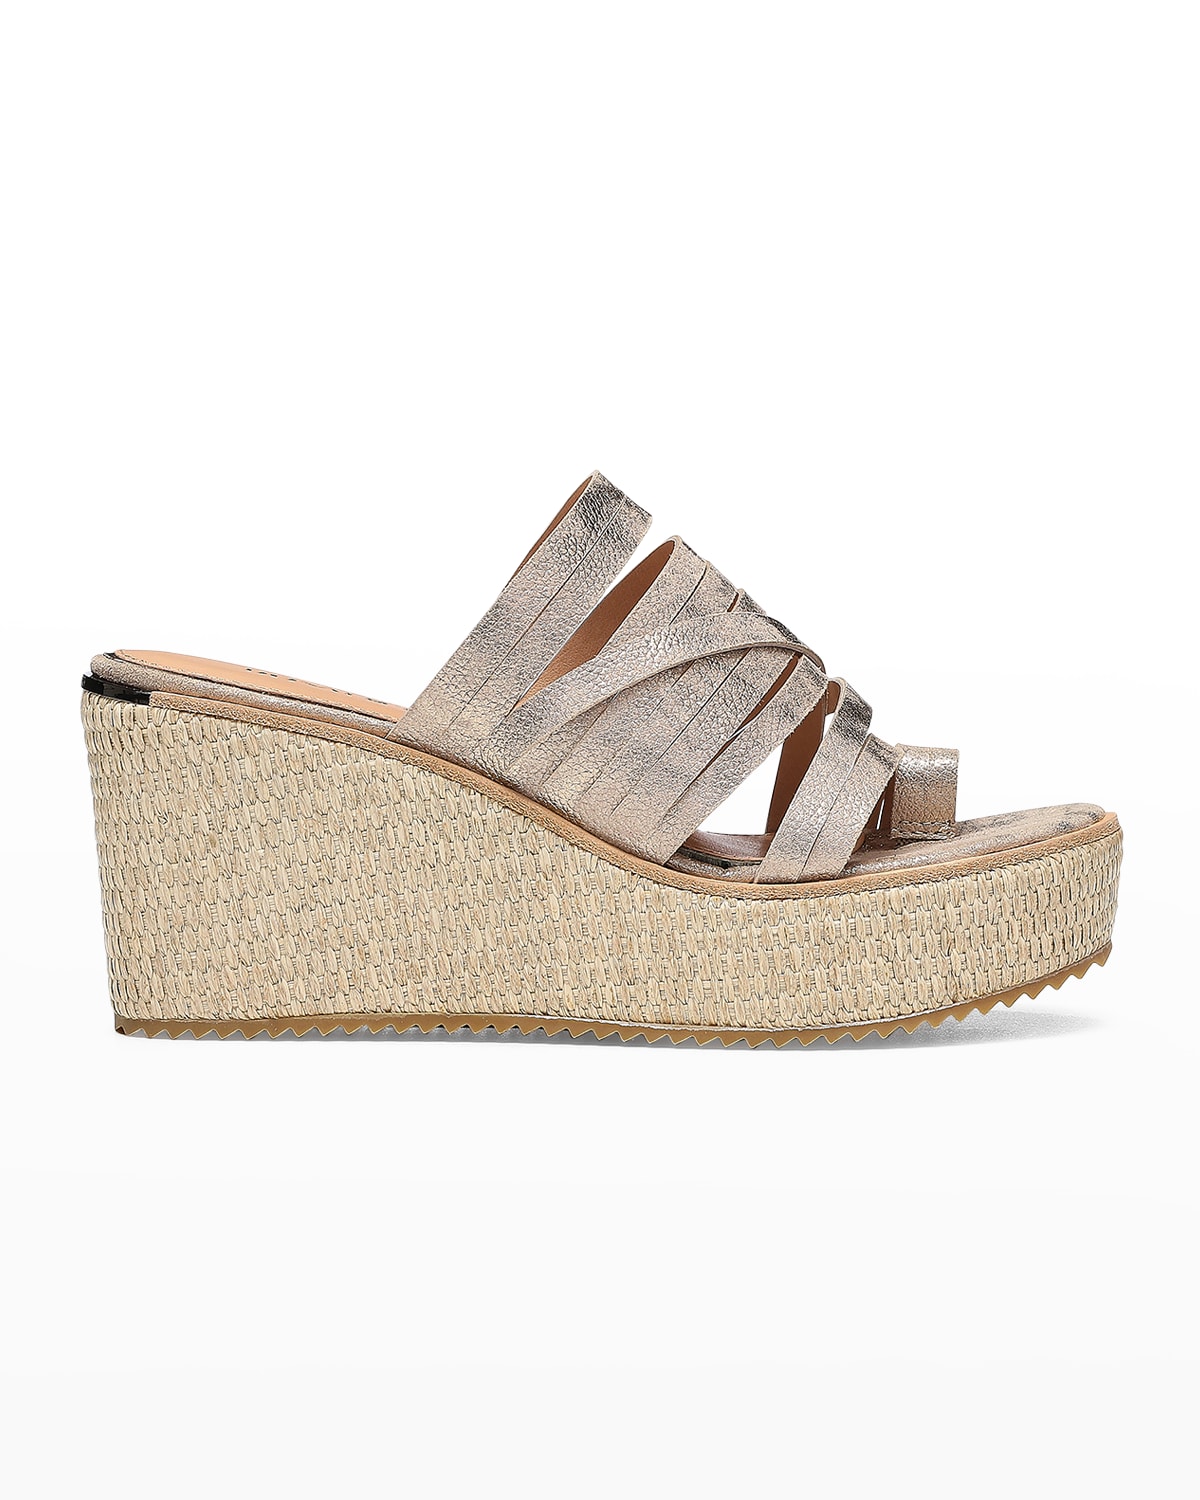 Ithaca Metallic Strappy Toe-Ring Wedge Sandals